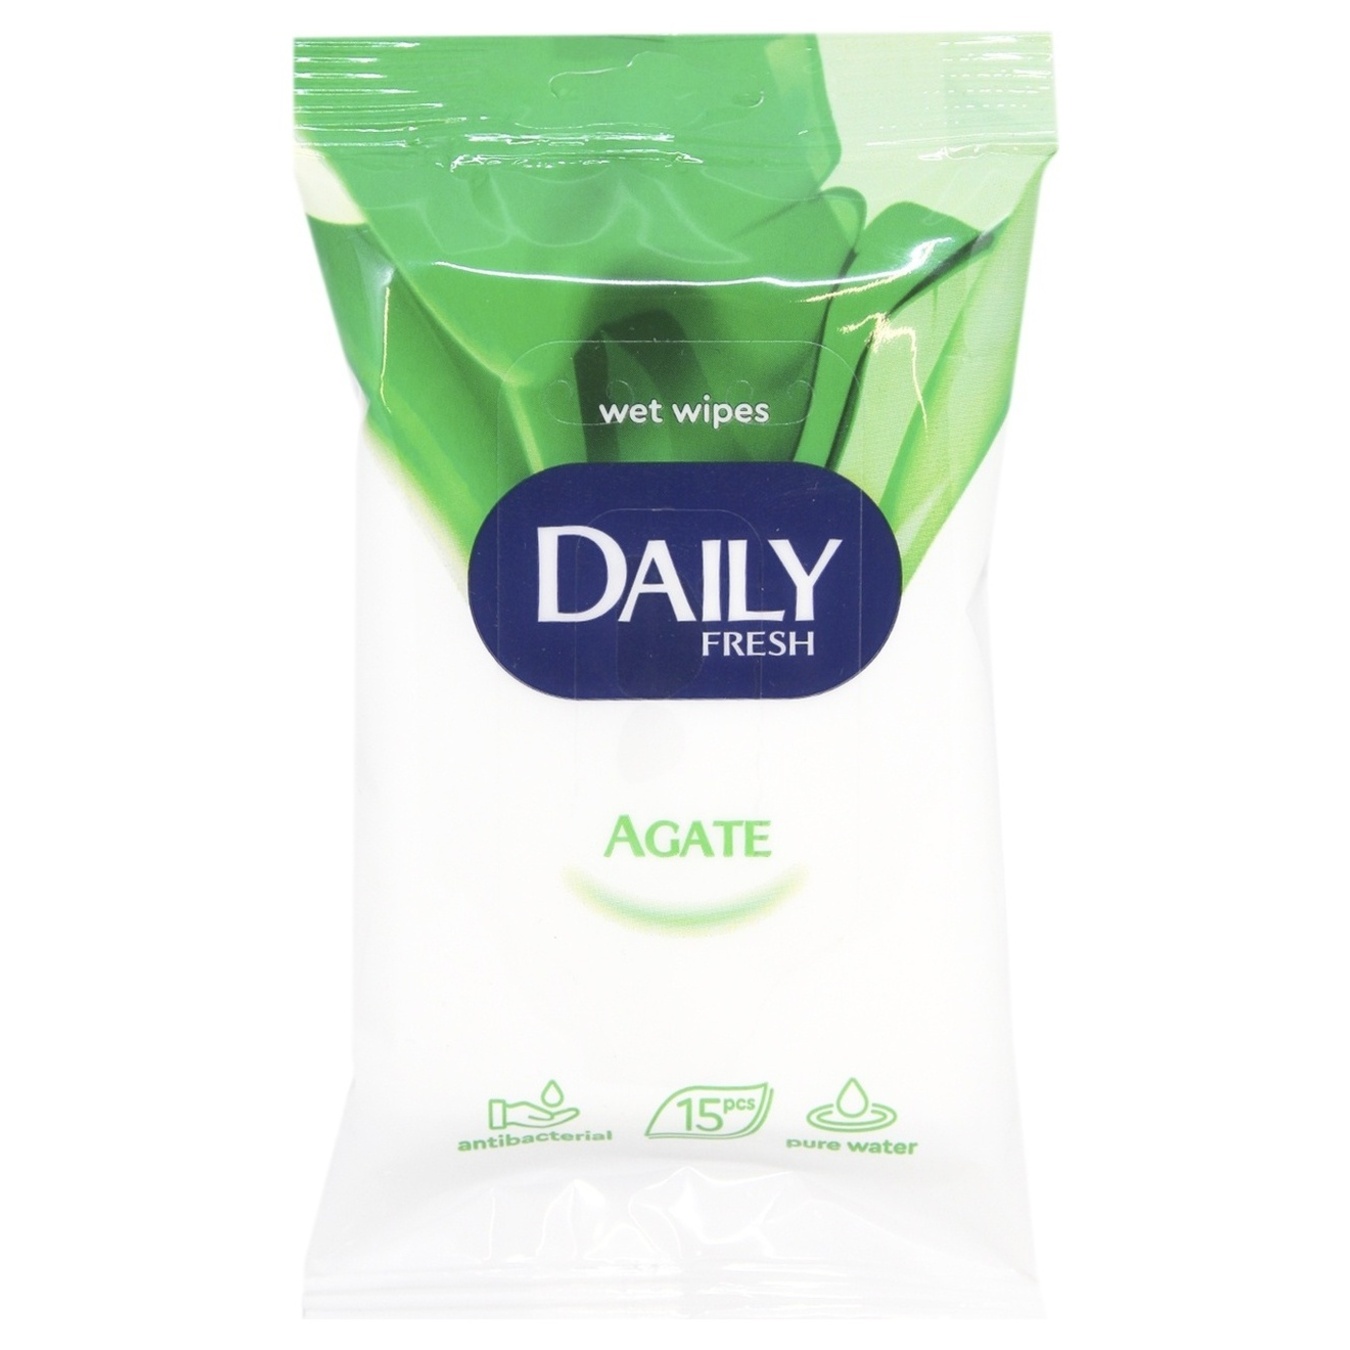 Daily Fresh Agate universal wet wipes 15pcs 2